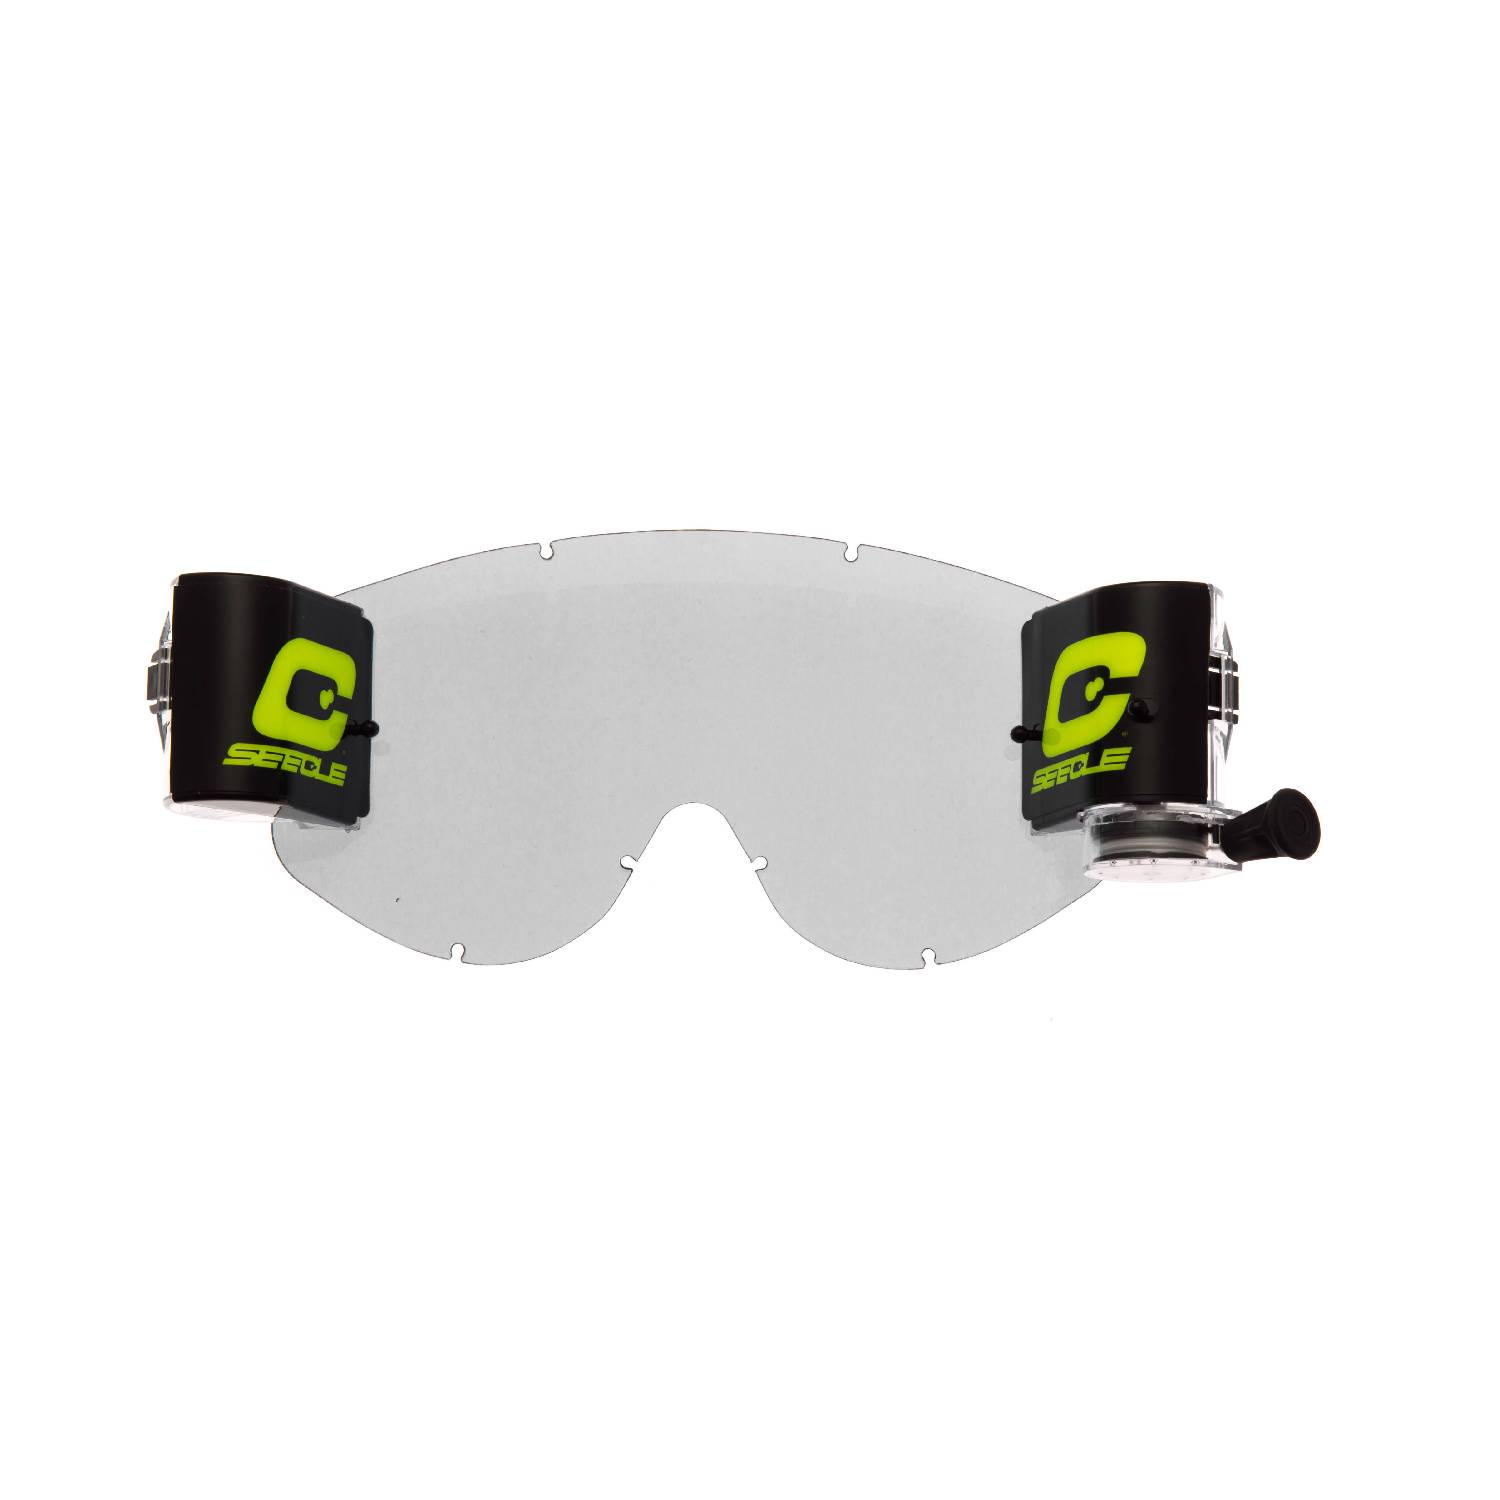 mud device kit clear compatible for Scott 83/89 / Recoil / 89 Xi goggle